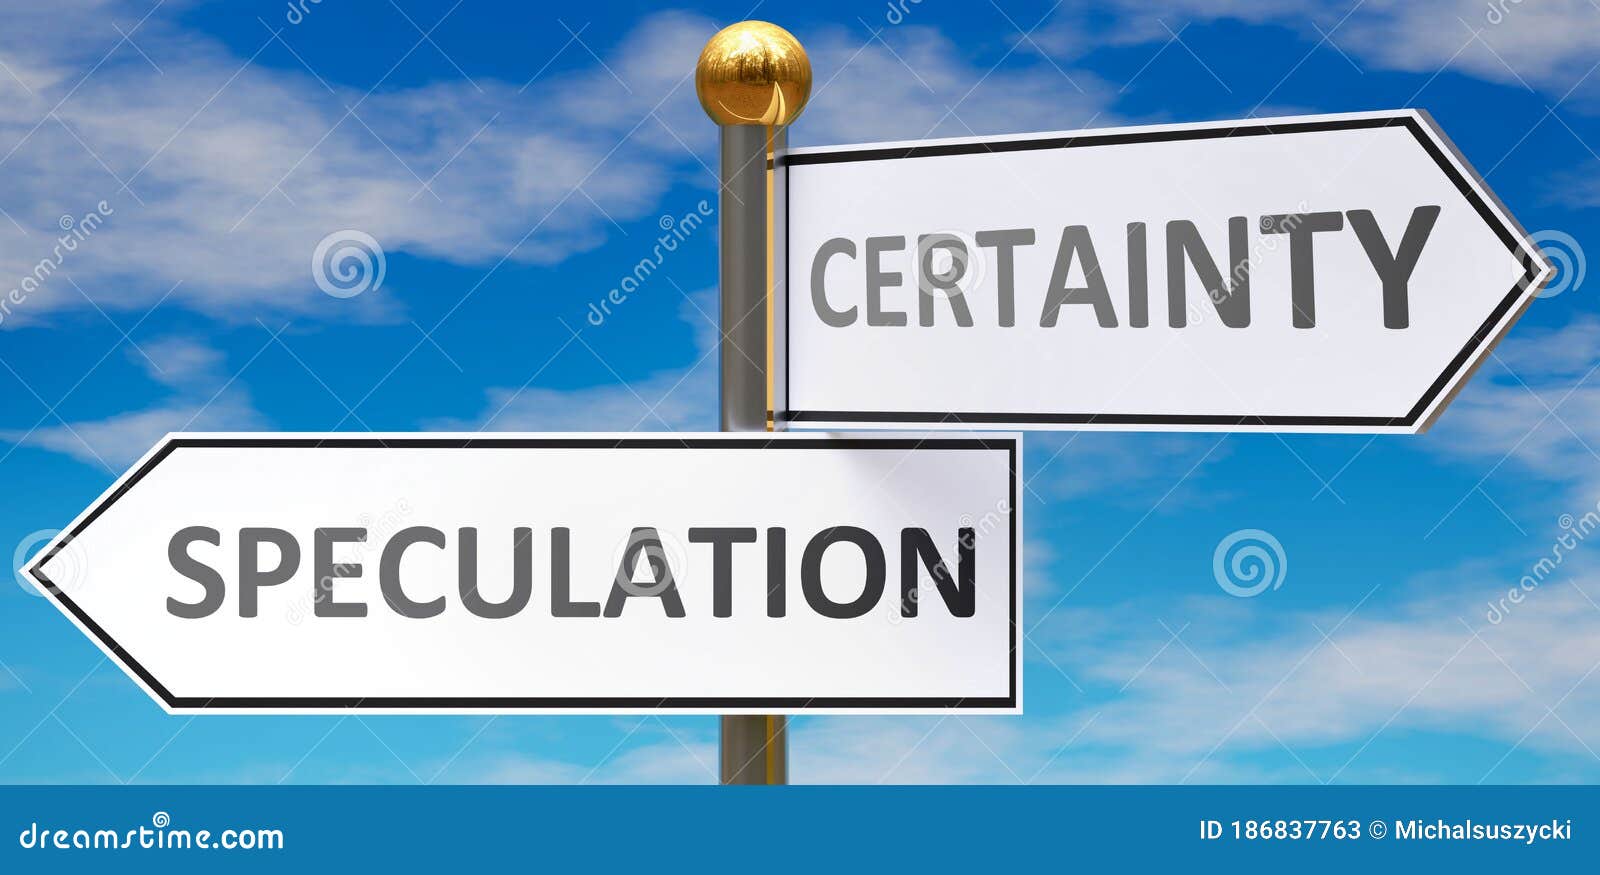 speculation and certainty as different choices in life - pictured as words speculation, certainty on road signs pointing at